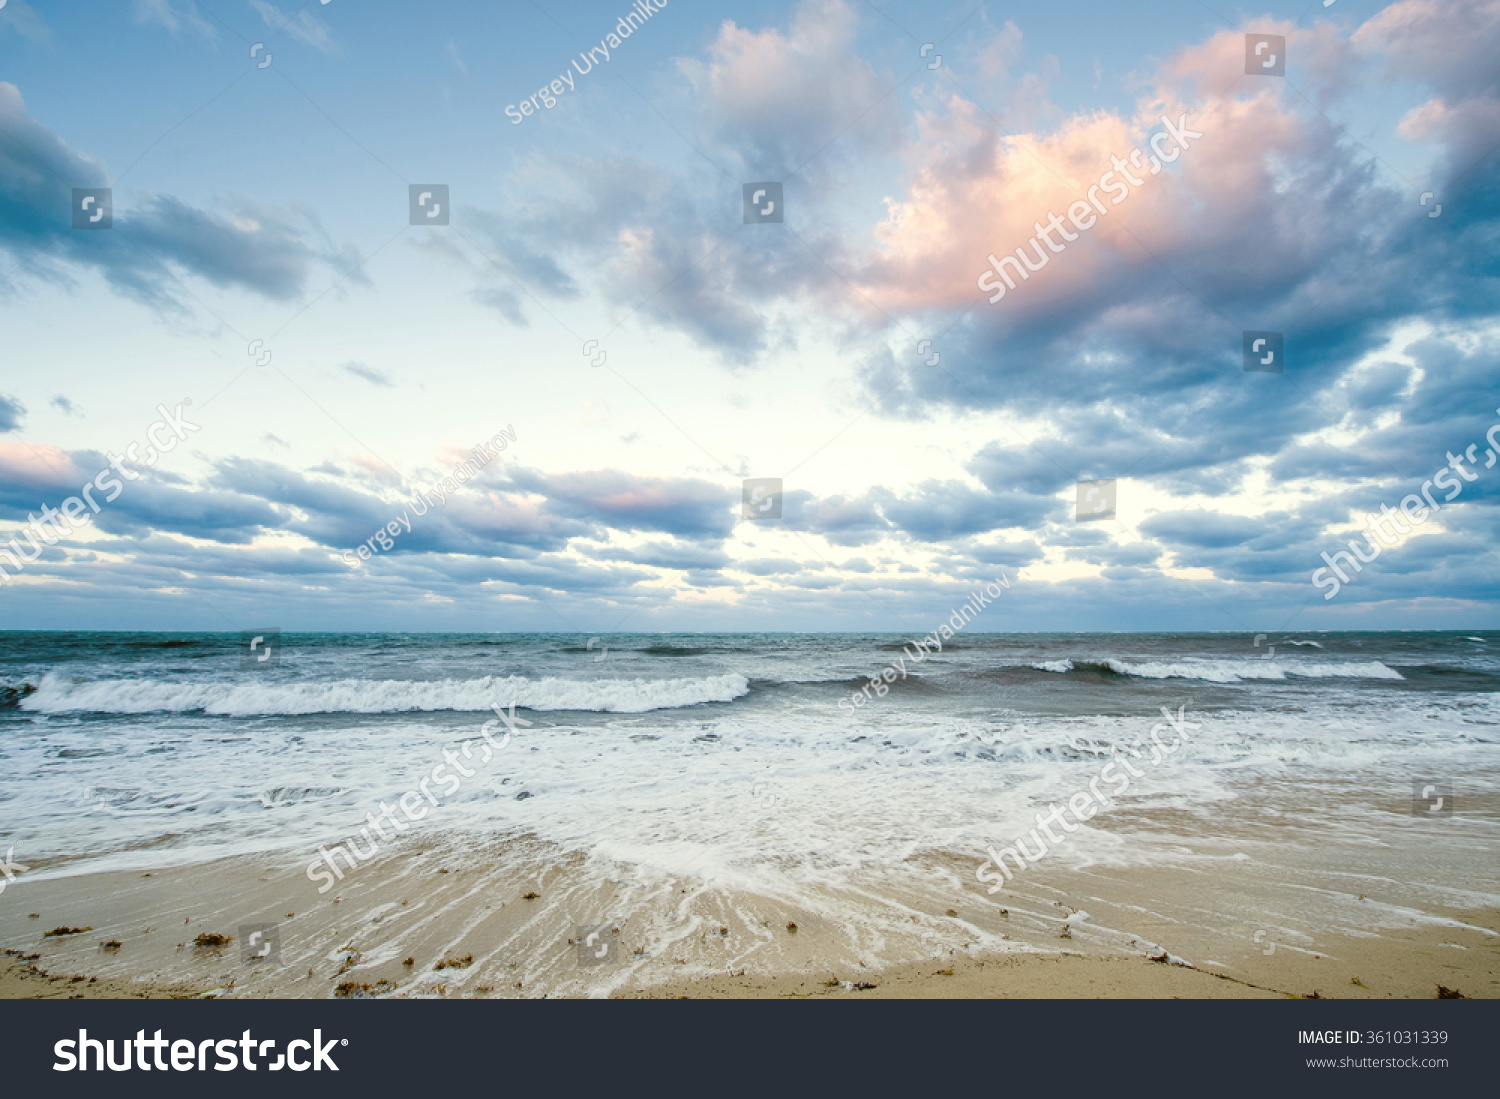   Beautiful sea landscape in early morning mist against the background of dramatic cloudy sky at sun rise time. Cuba coast. #361031339